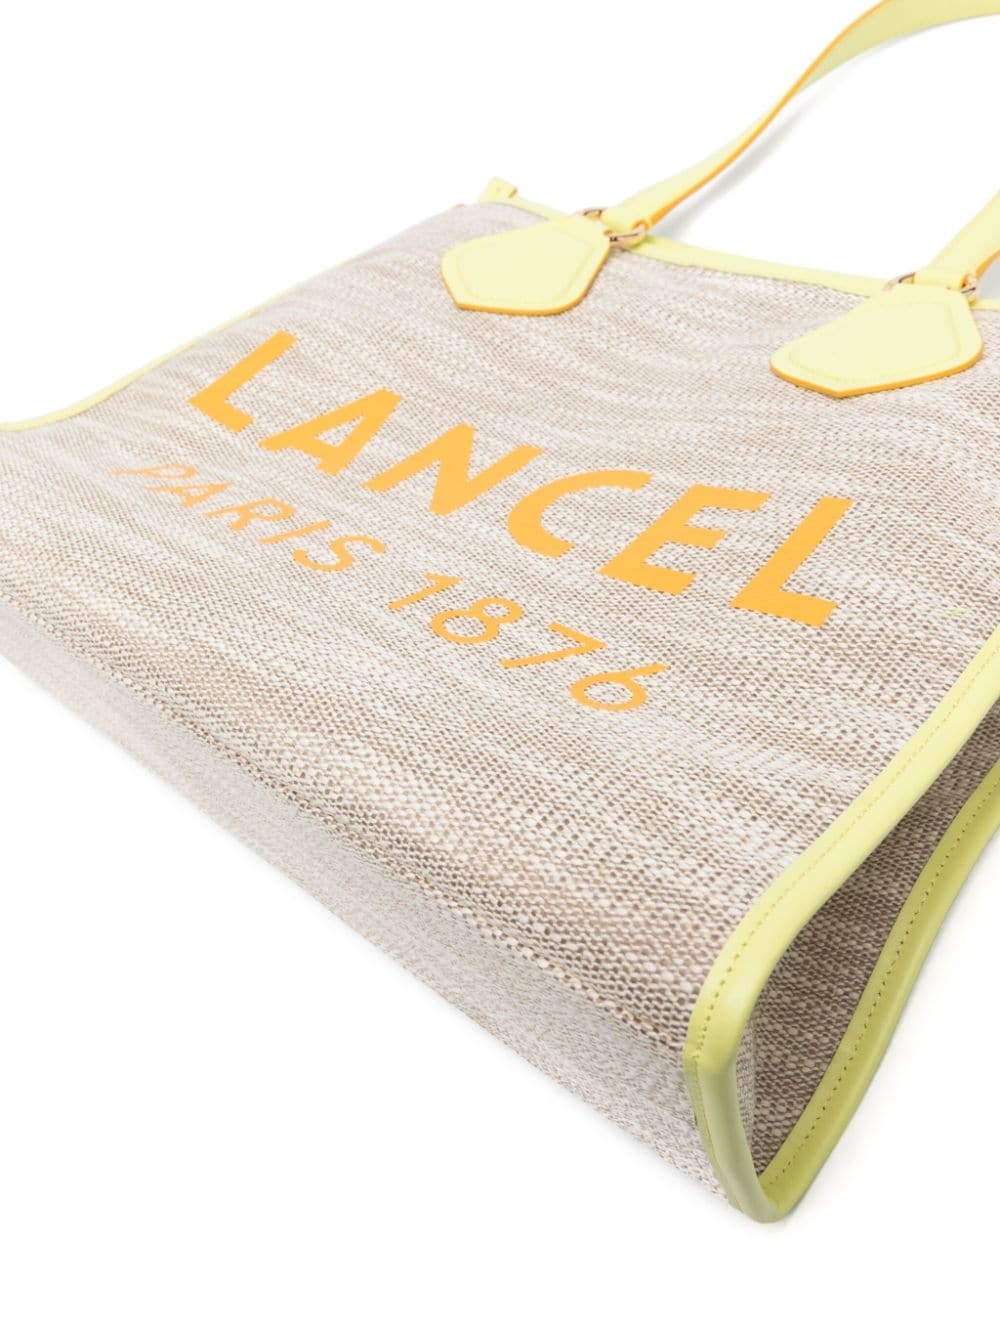 large Summer canvas tote bag - 4